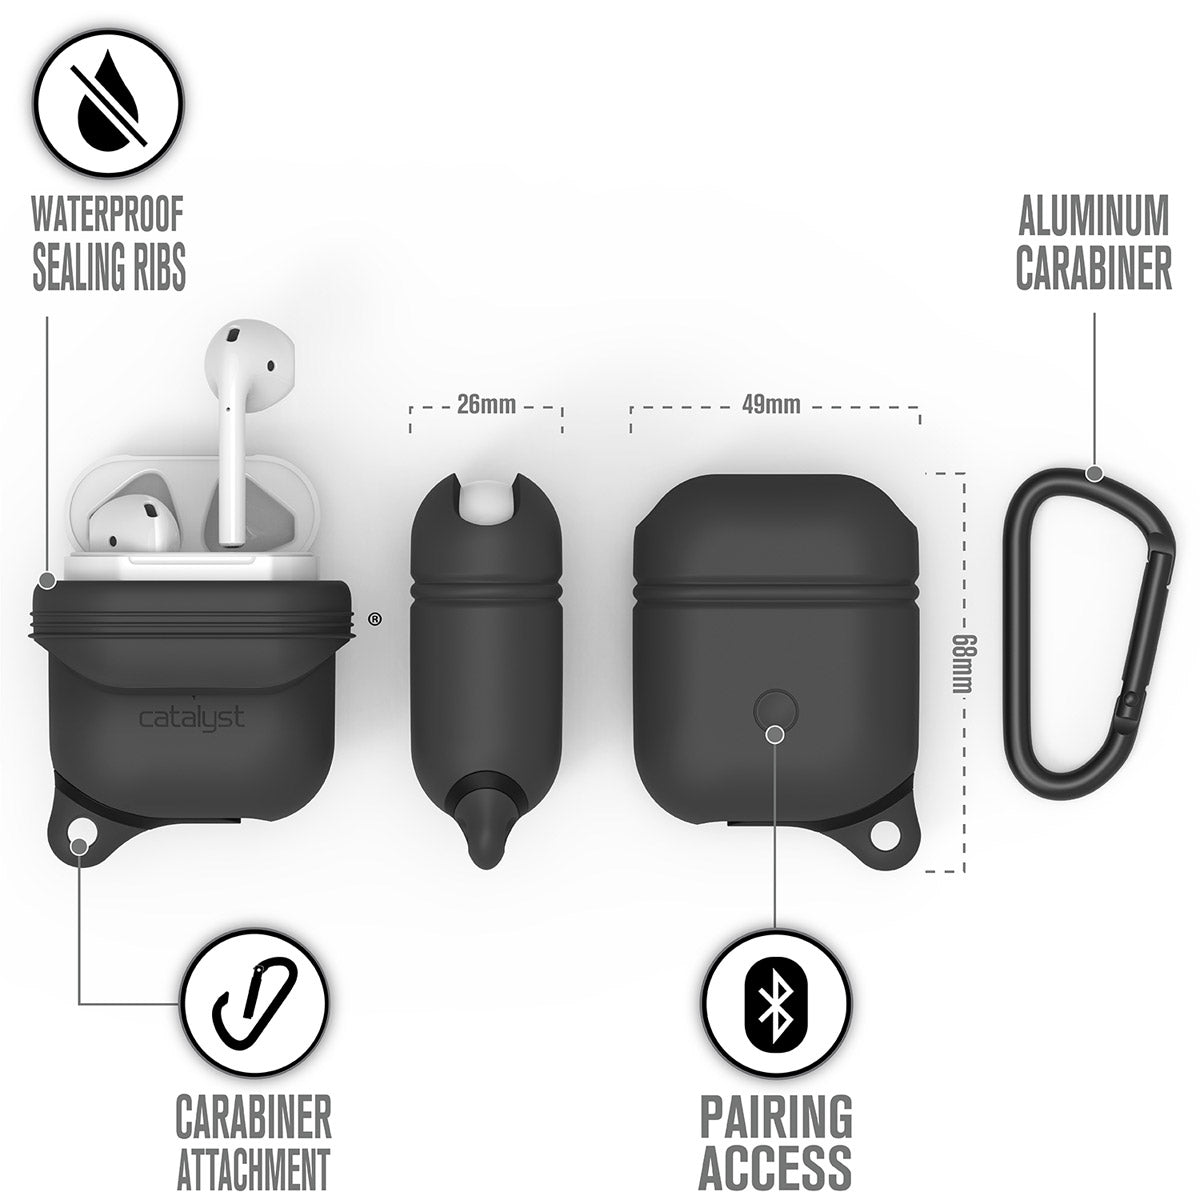 CATAPDGRY-FBA | Catalyst airpods gen2/1 waterproof case + carabiner showing the case dimension and features in slate gray text reads waterproof sealing ribs aluminum carabiner pairing access carabiner attachment